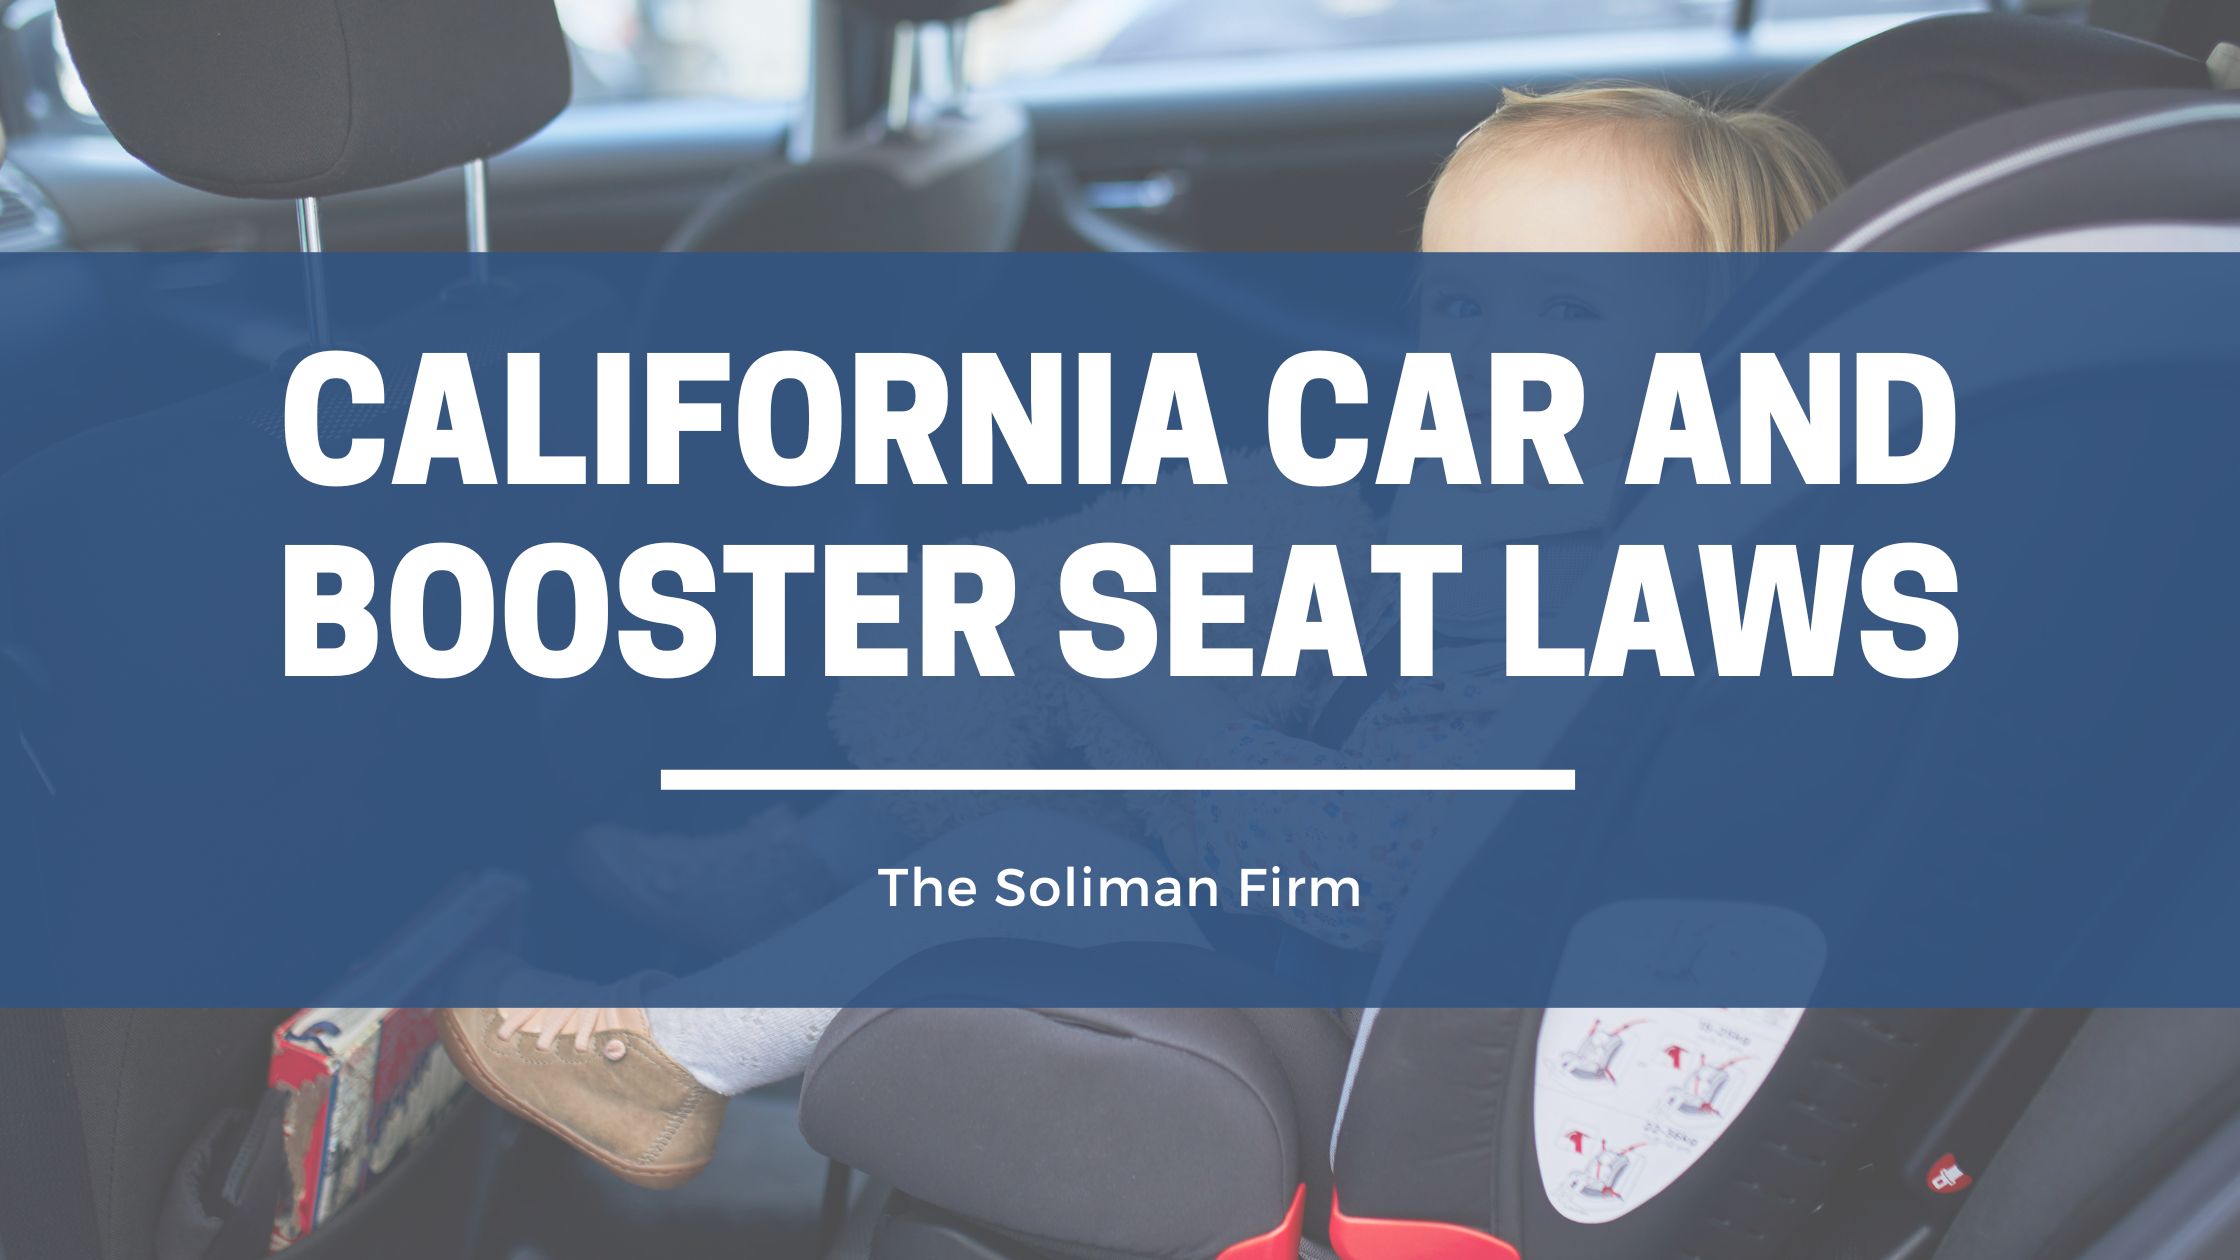 California Car And Booster Seat Laws The Soliman Firm Plc